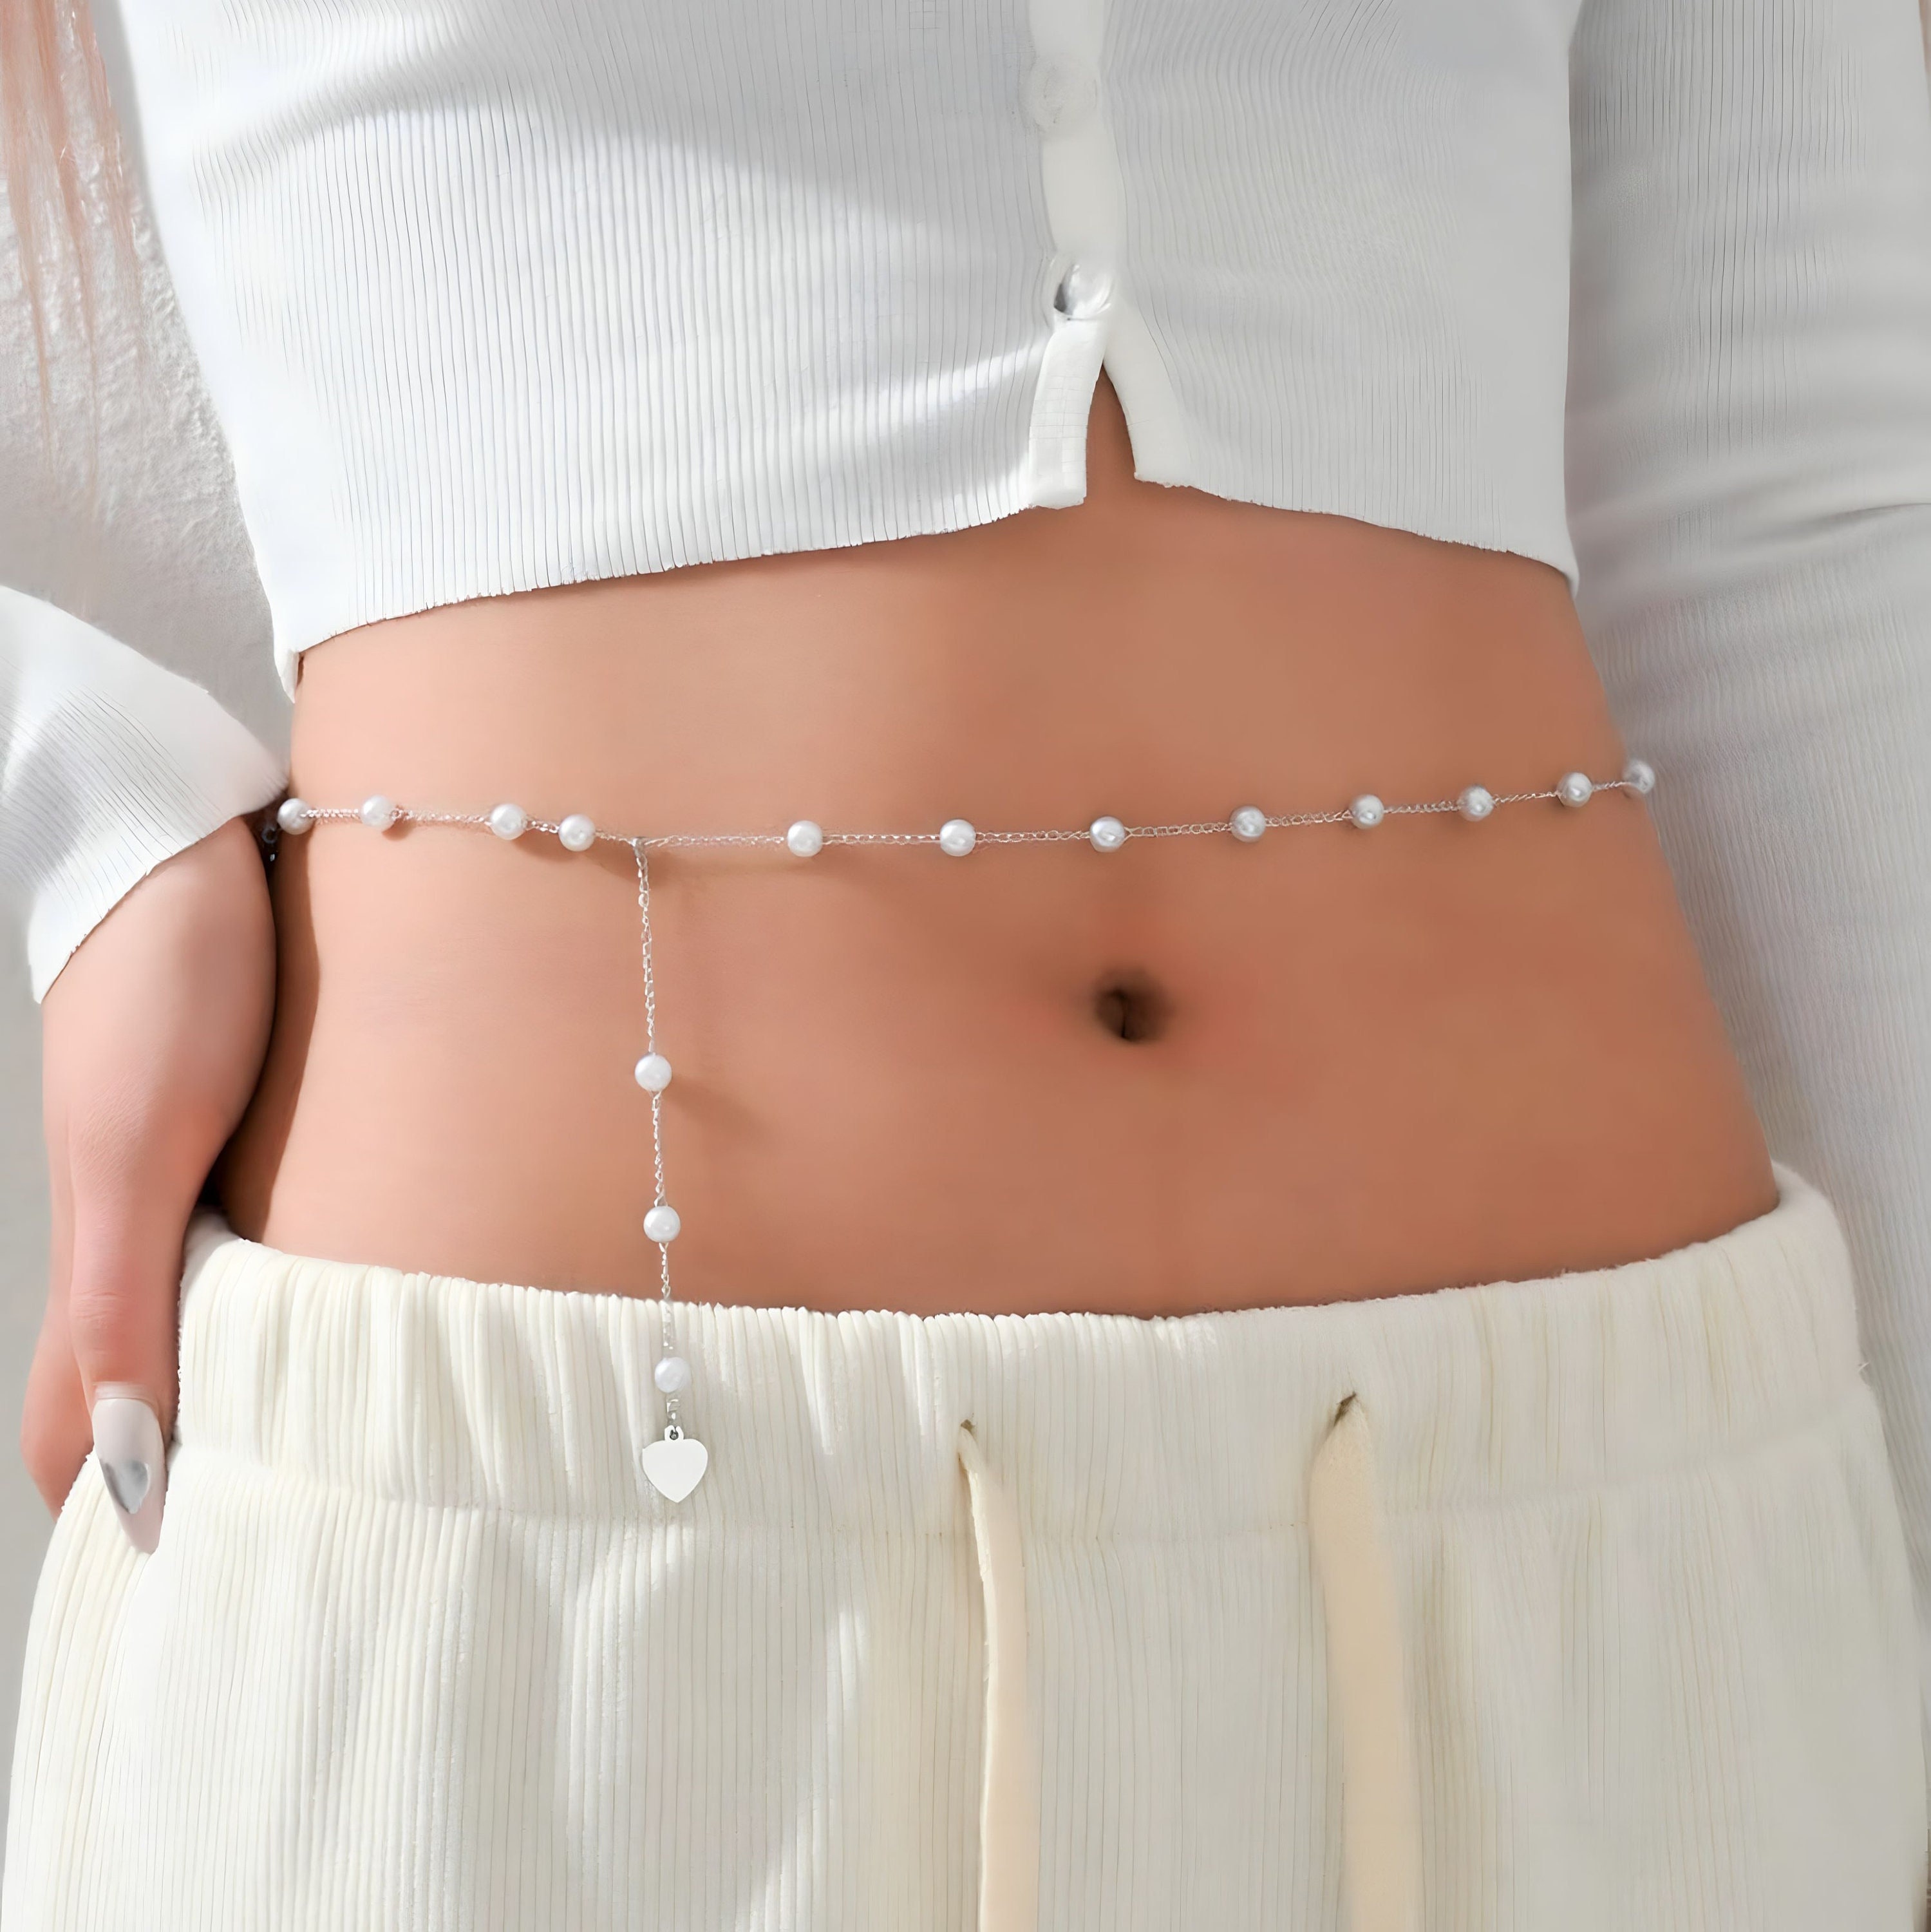 Buy Waist Chain At Best Price Online In India